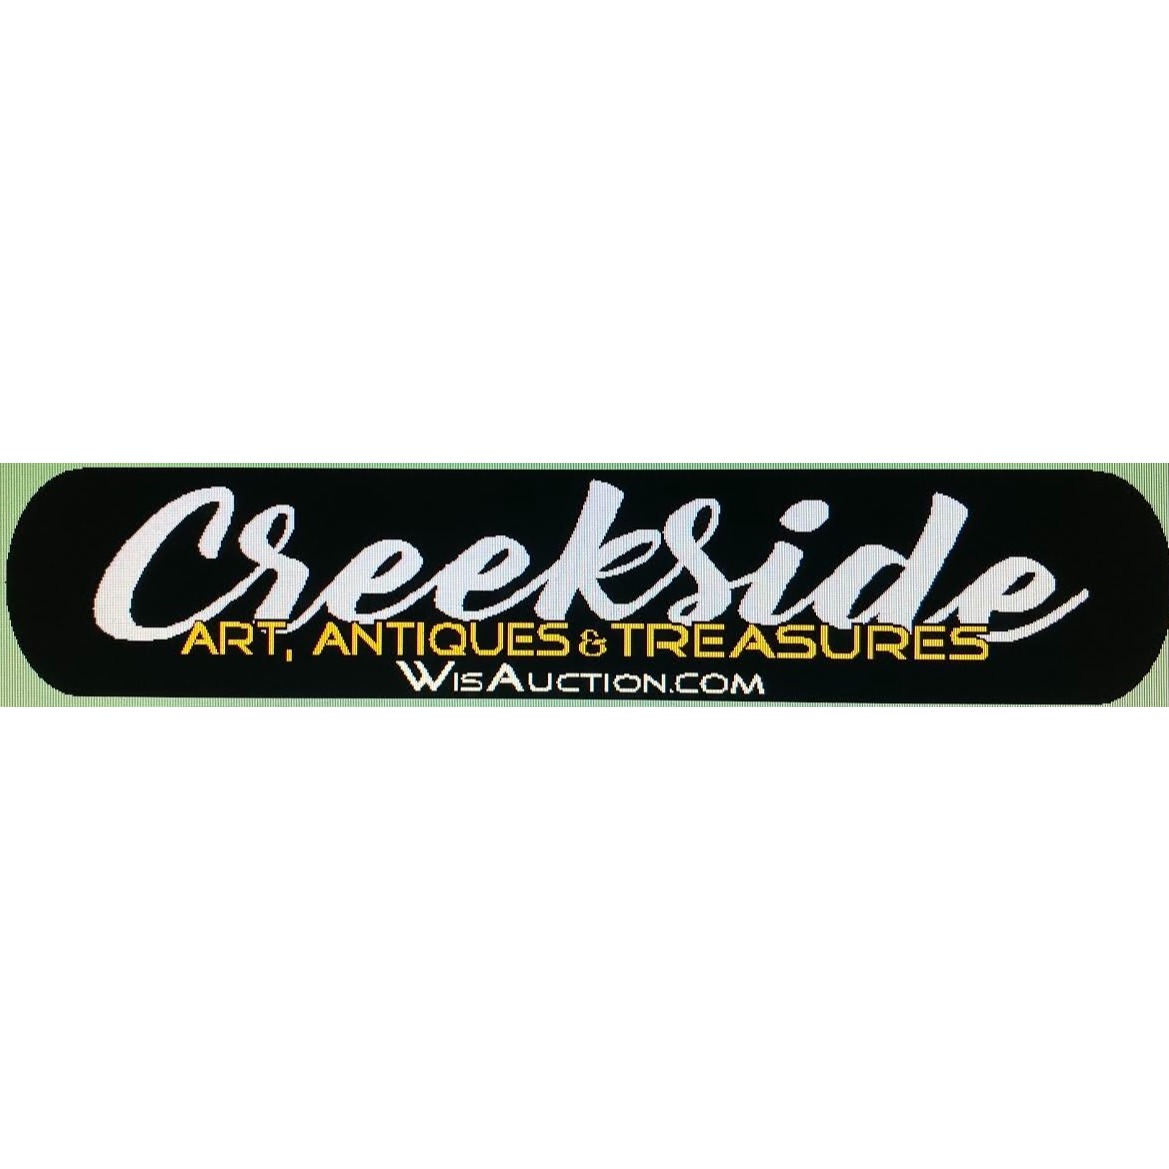 Creekside Art, Antiques and Treasures